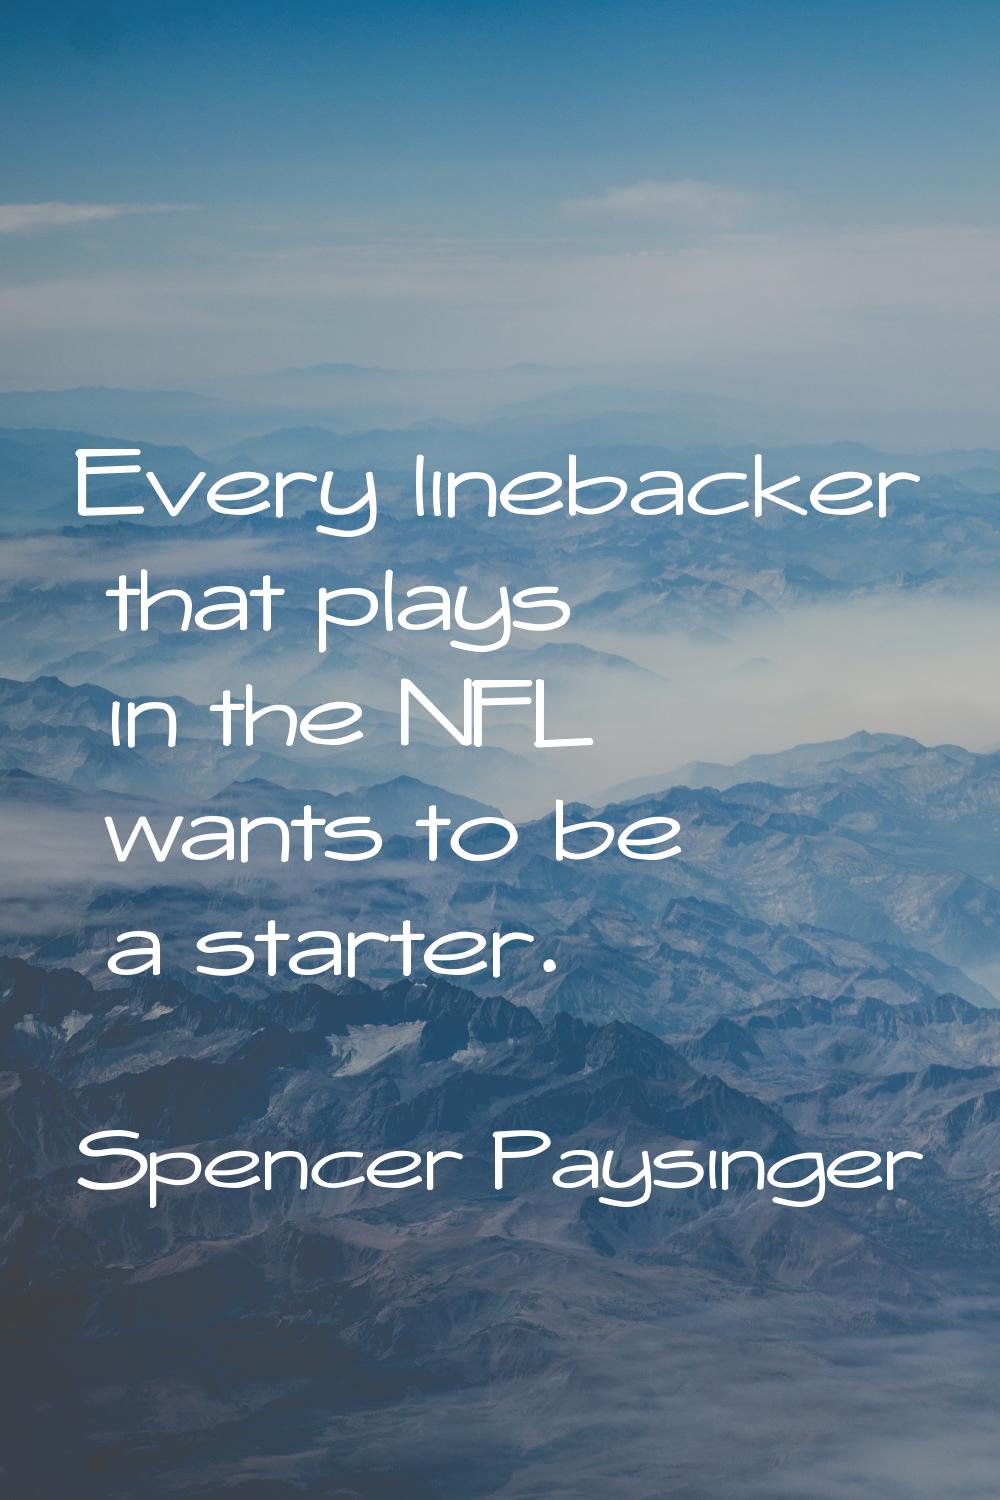 Every linebacker that plays in the NFL wants to be a starter.